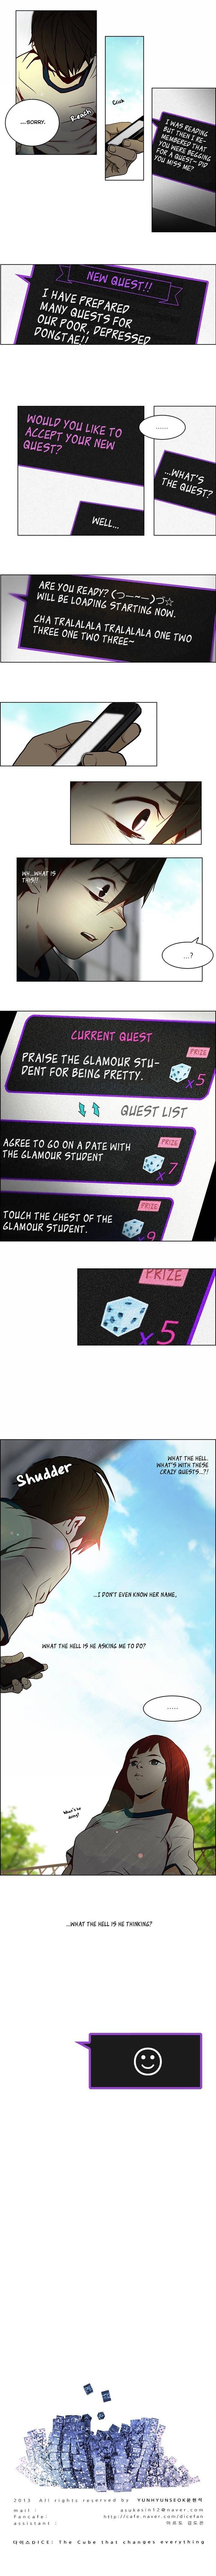 DICE: The Cube That Changes Everything Chapter 7 page 6